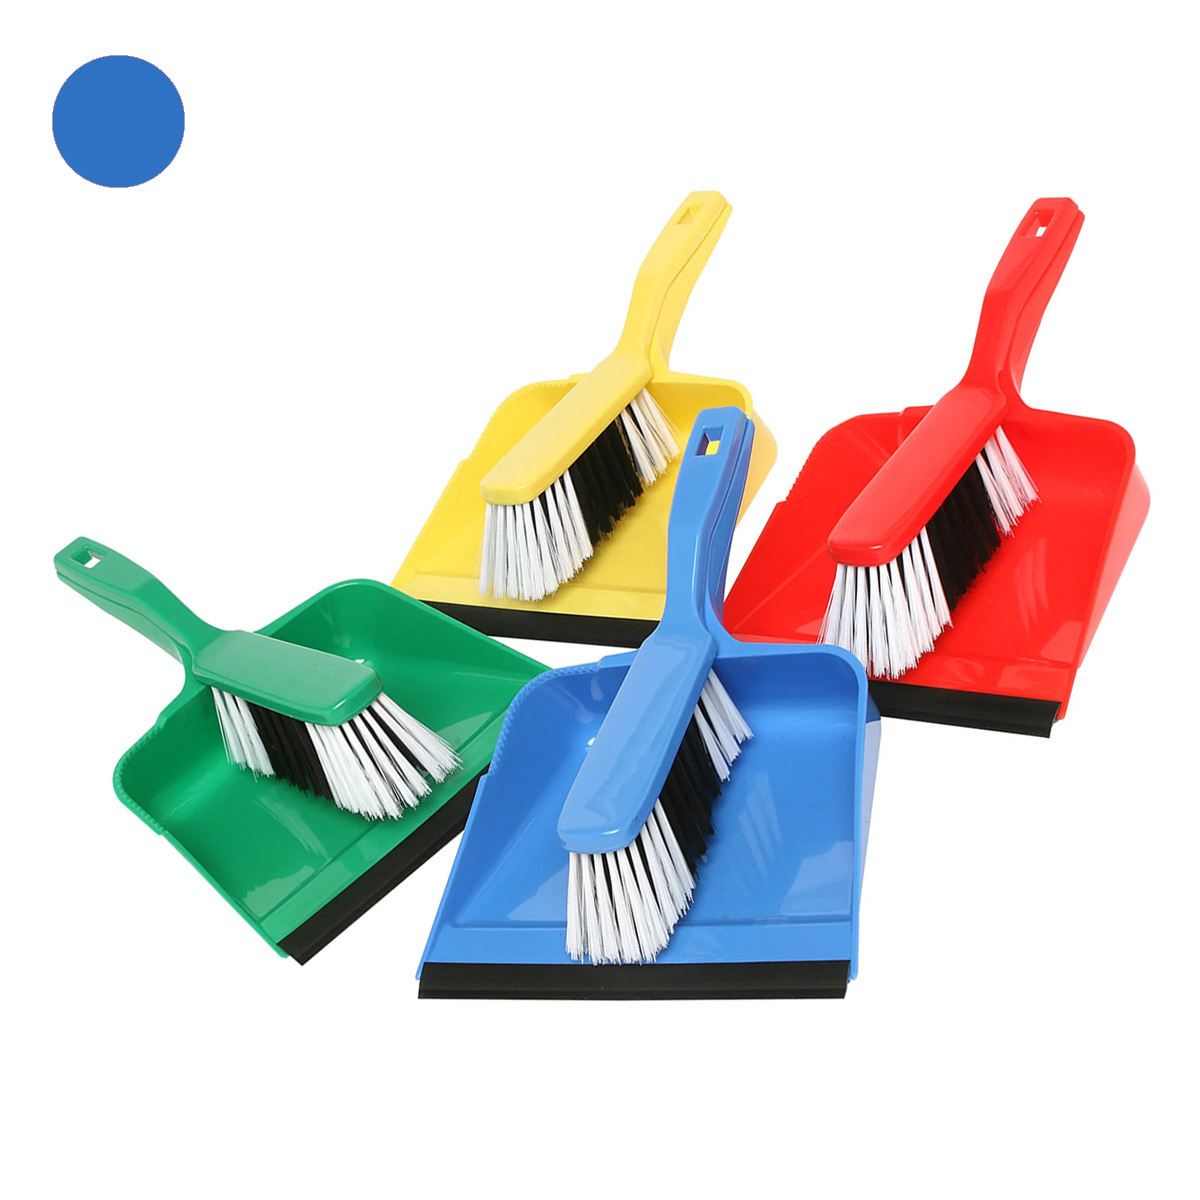 cleaning-equipment-brushware-edco-brush-pan-set-blue-commercial-and-domestic-applications-rubber-surface-contour-strip-for-grit-pick-up-vjs-distributors-ED19124